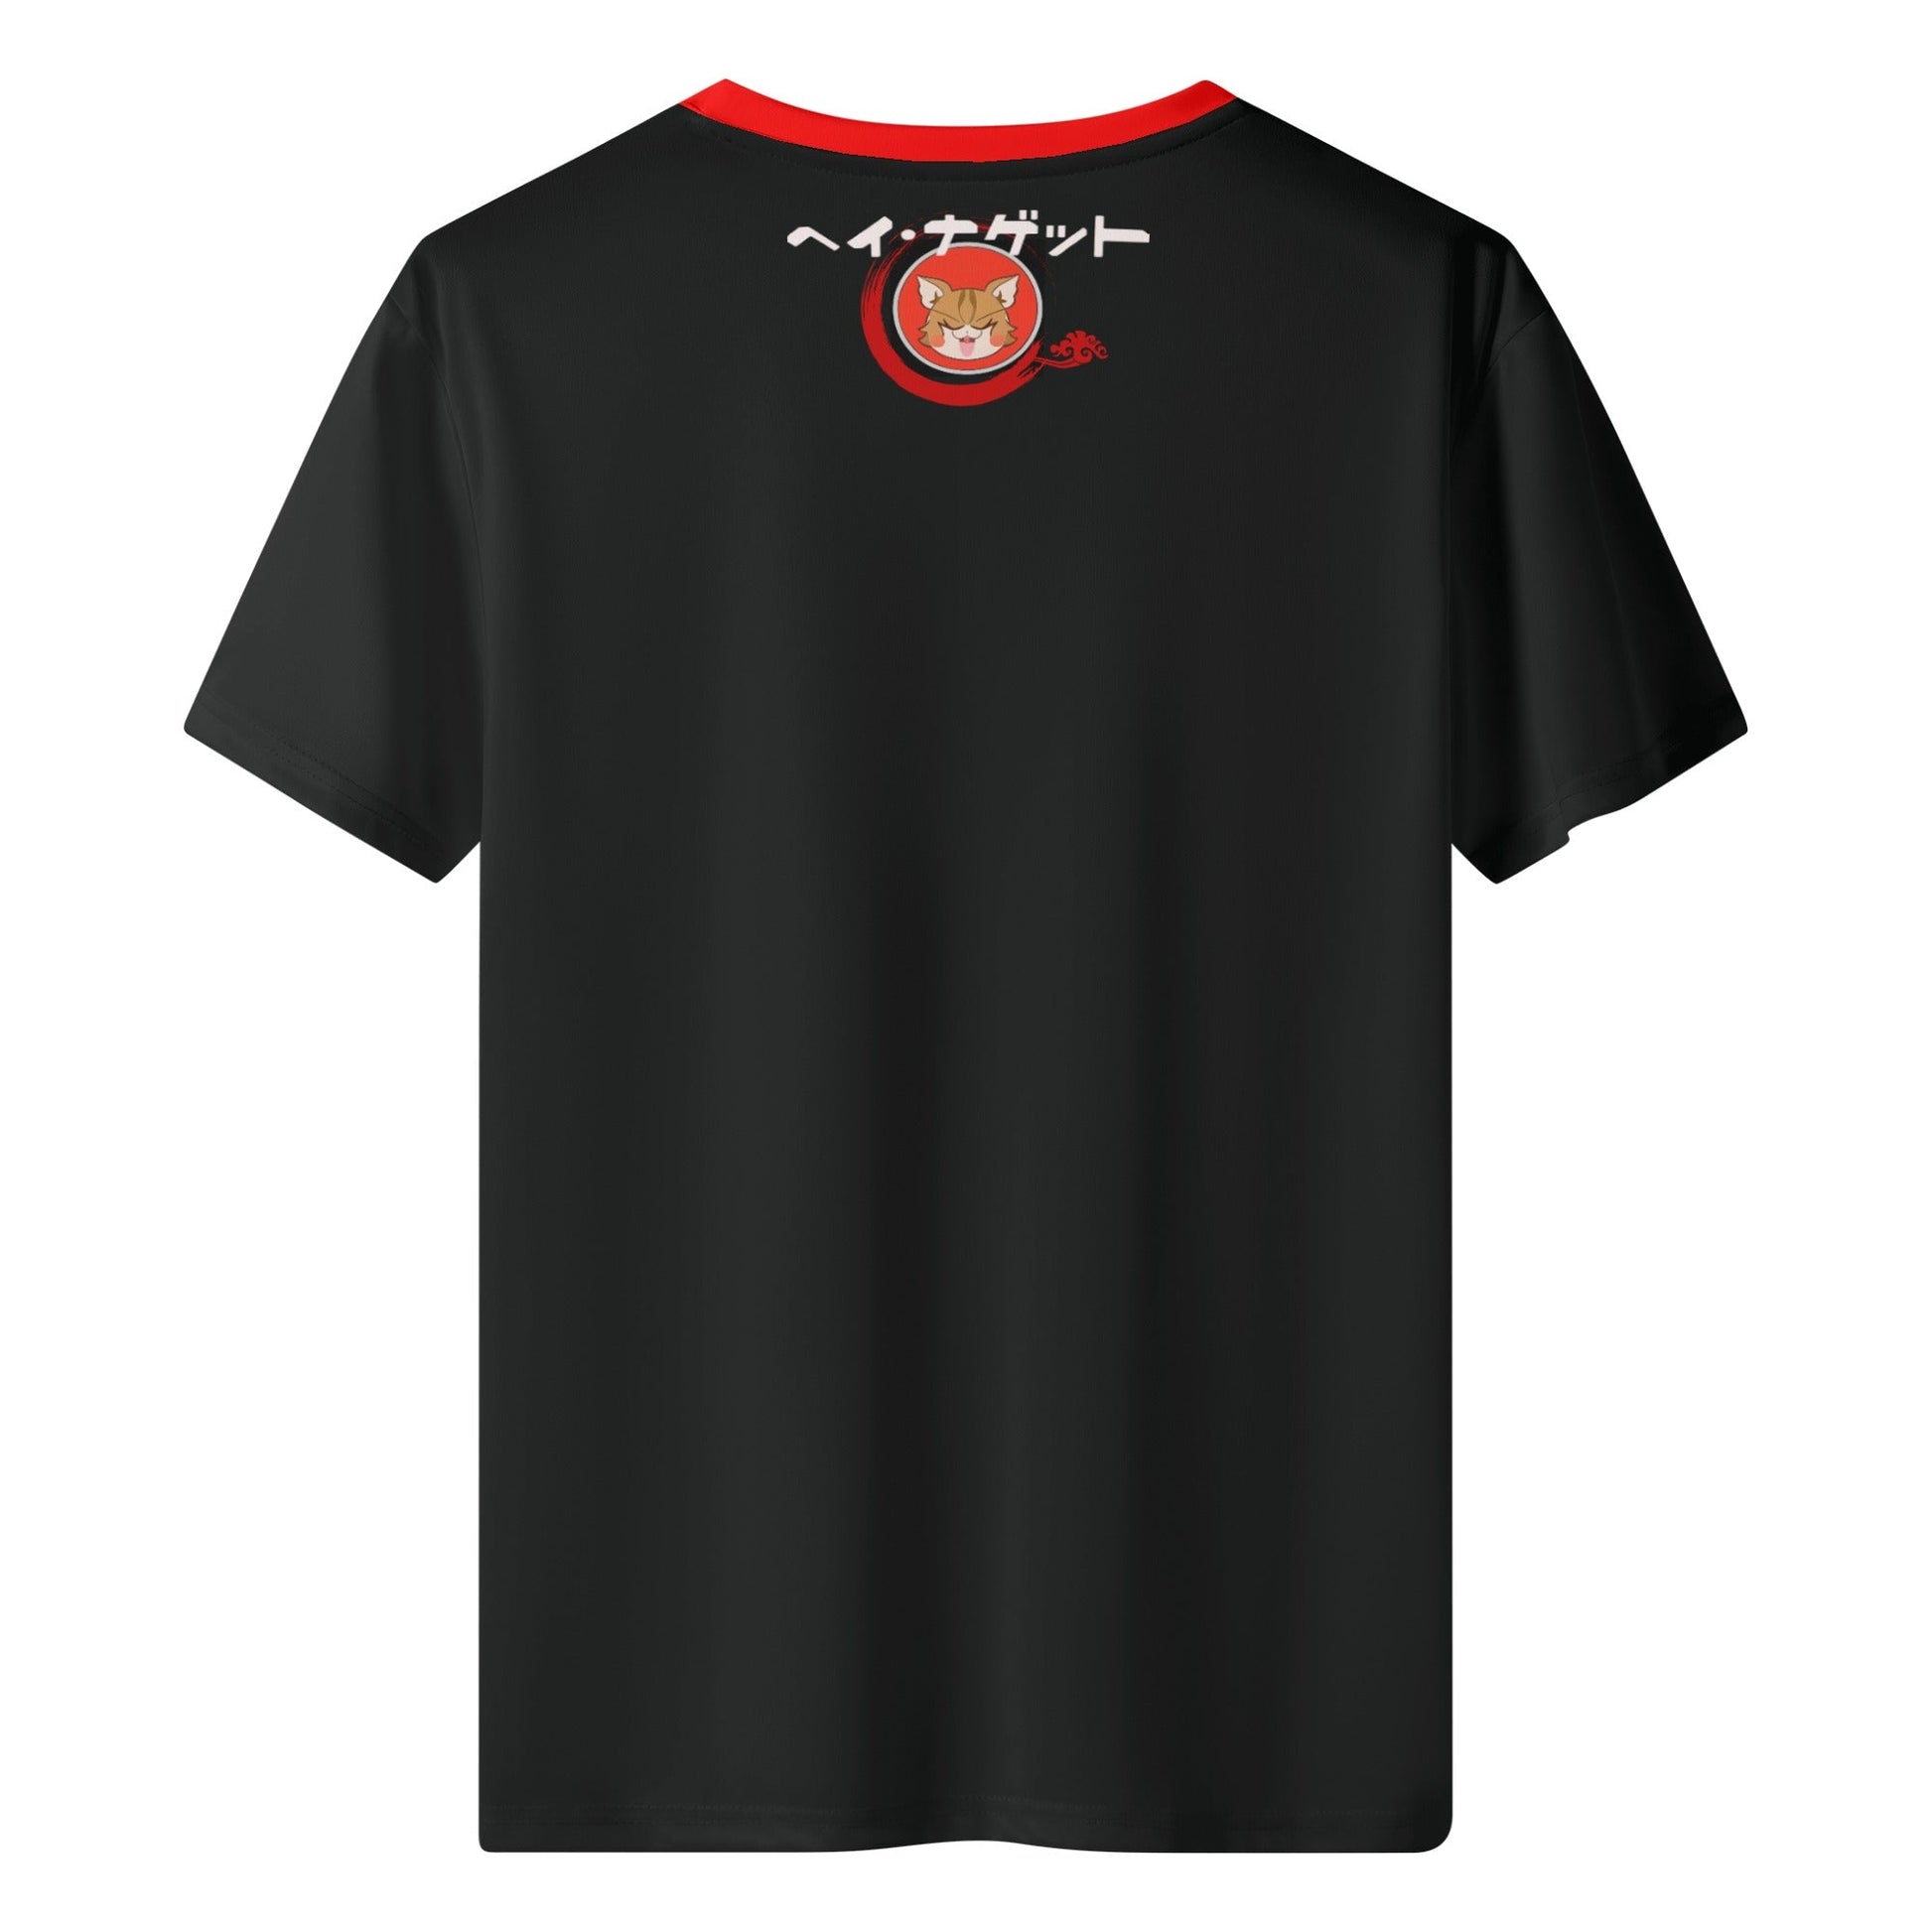 Stand out  with the  Tokyo Nugget Mens Sleeve T-Shirt  available at Hey Nugget. Grab yours today!